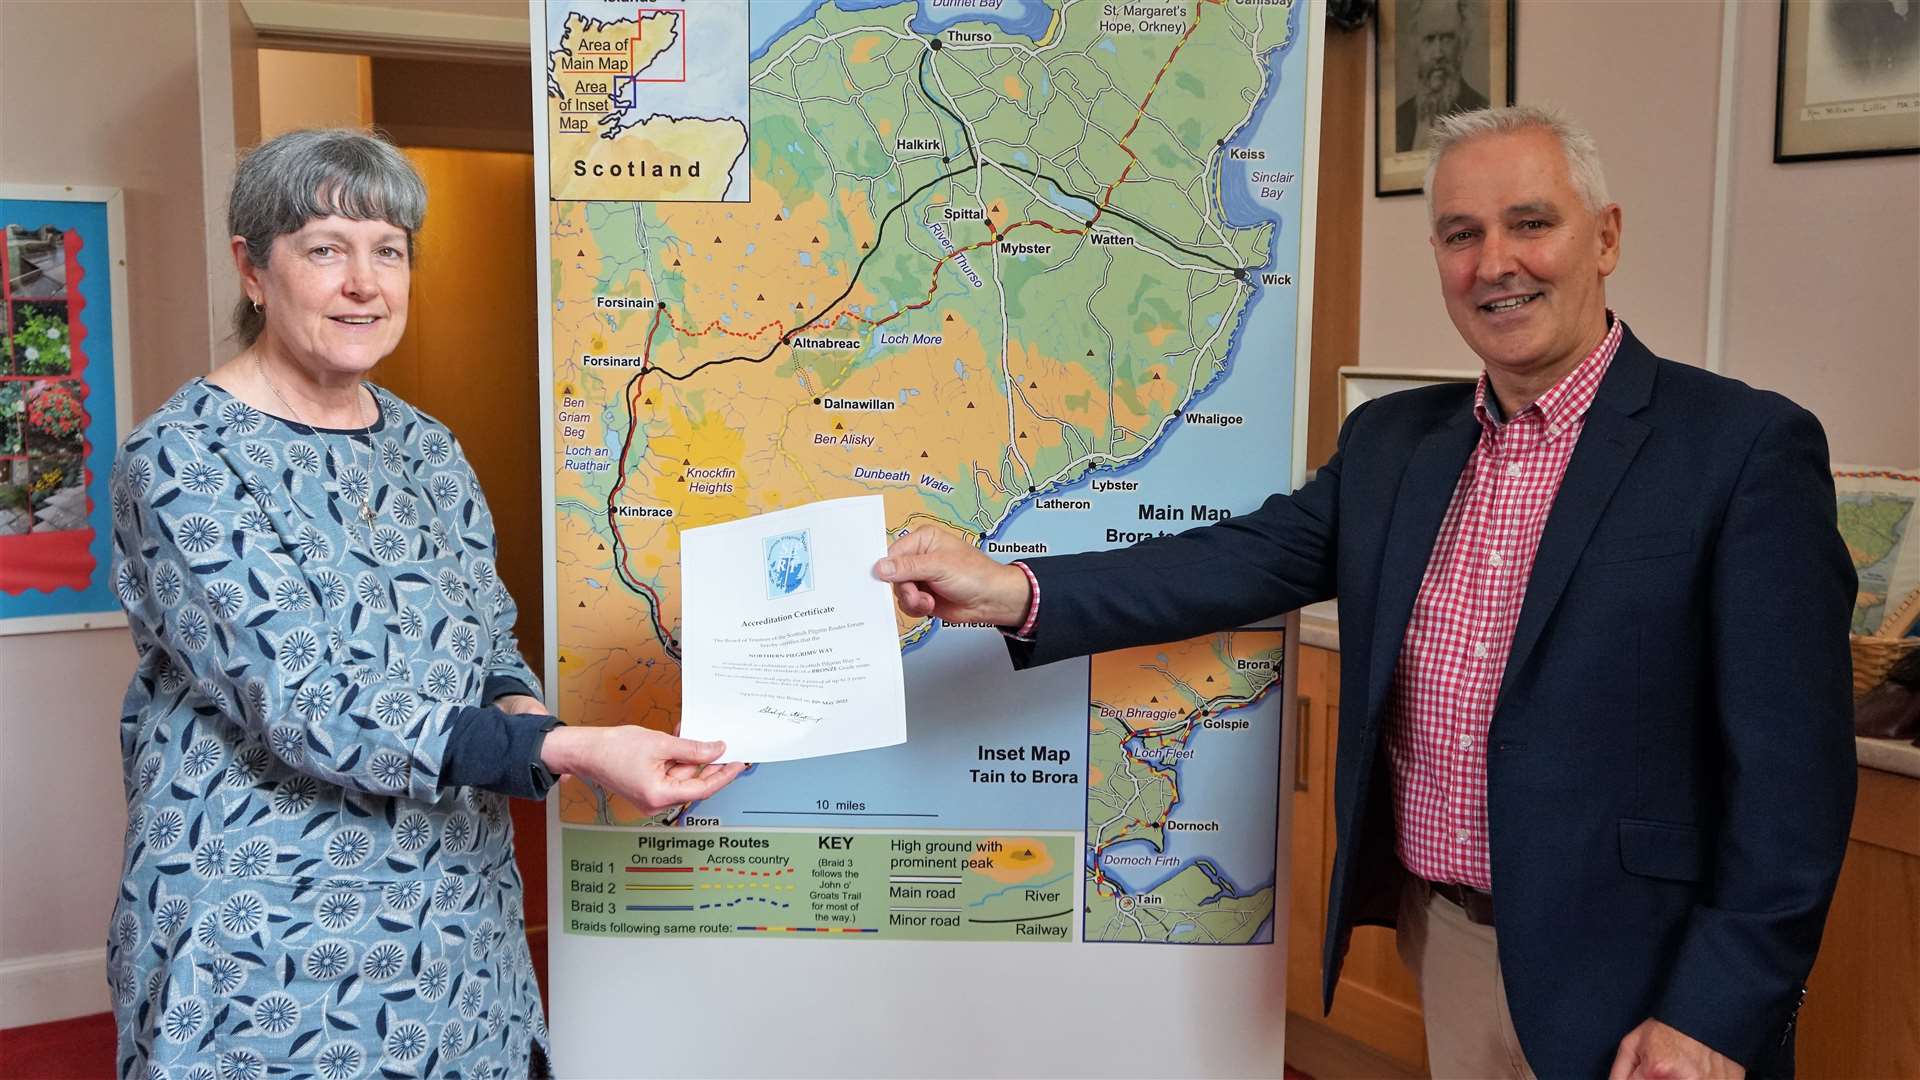 Trustee of the Scottish Pilgrim Routes Forum Fiona Mitchell hands the certificate to Cllr Karl Rosie who is chairman of the Northern Pilgrims Way. Picture: DGS